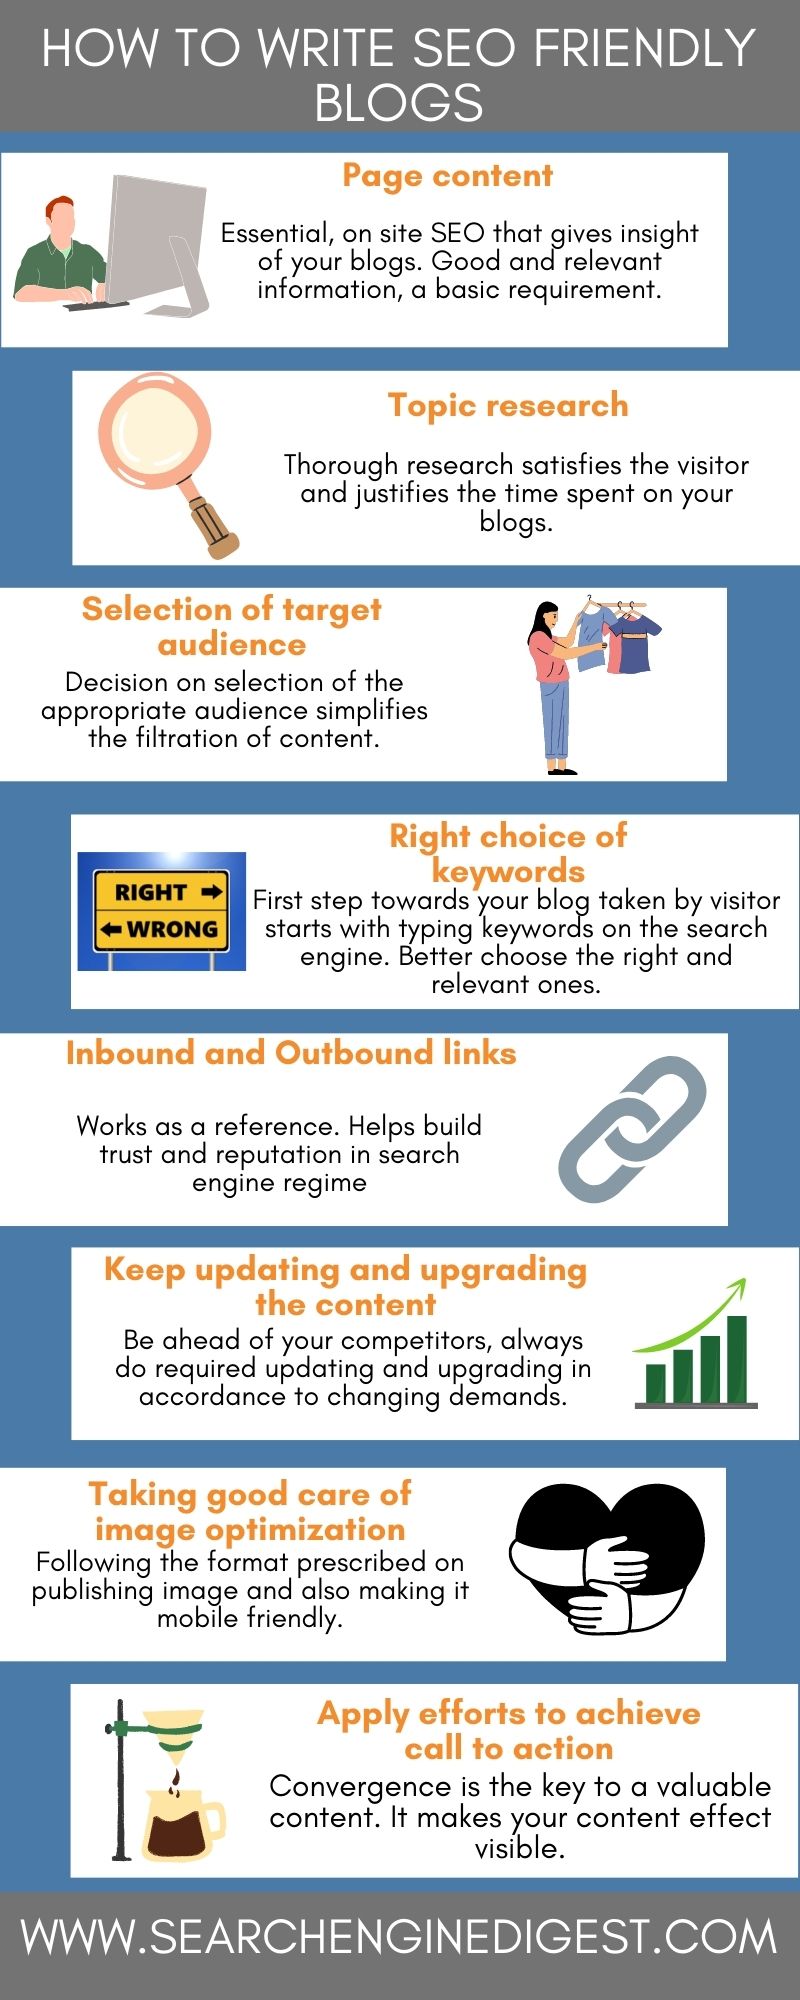 SEO-friendly infographic